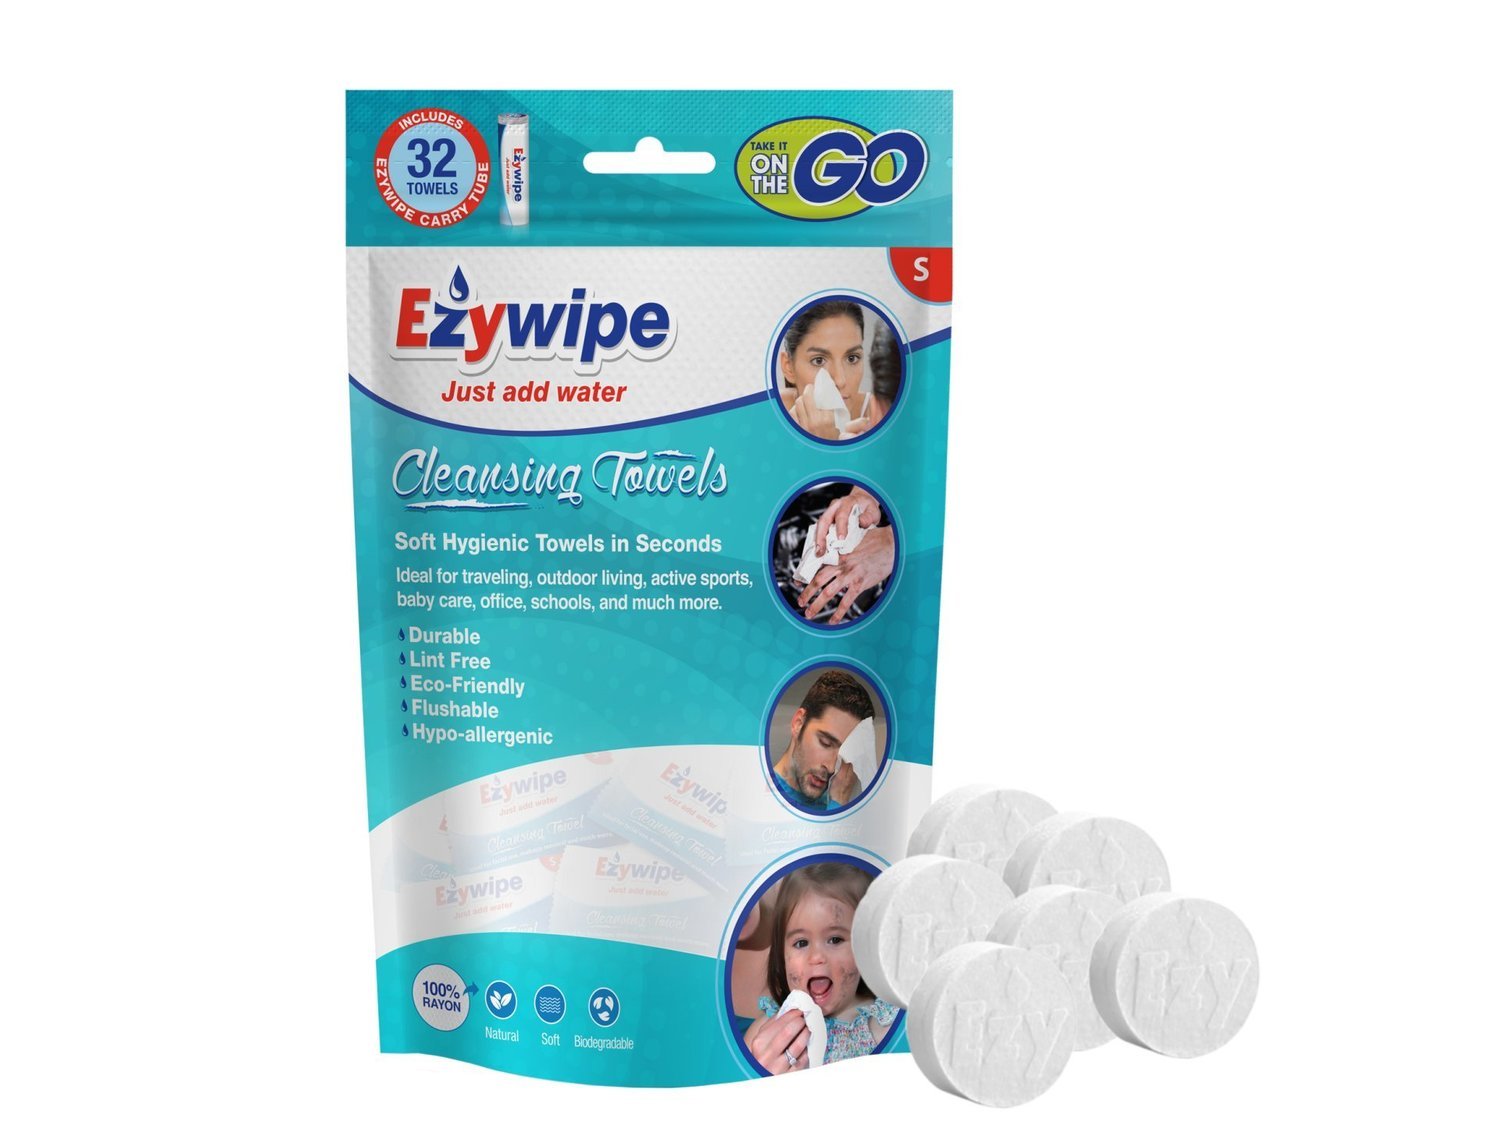 Ezywipe Tube Refill. 24 Cleansing Towels size S + 1 Tube.